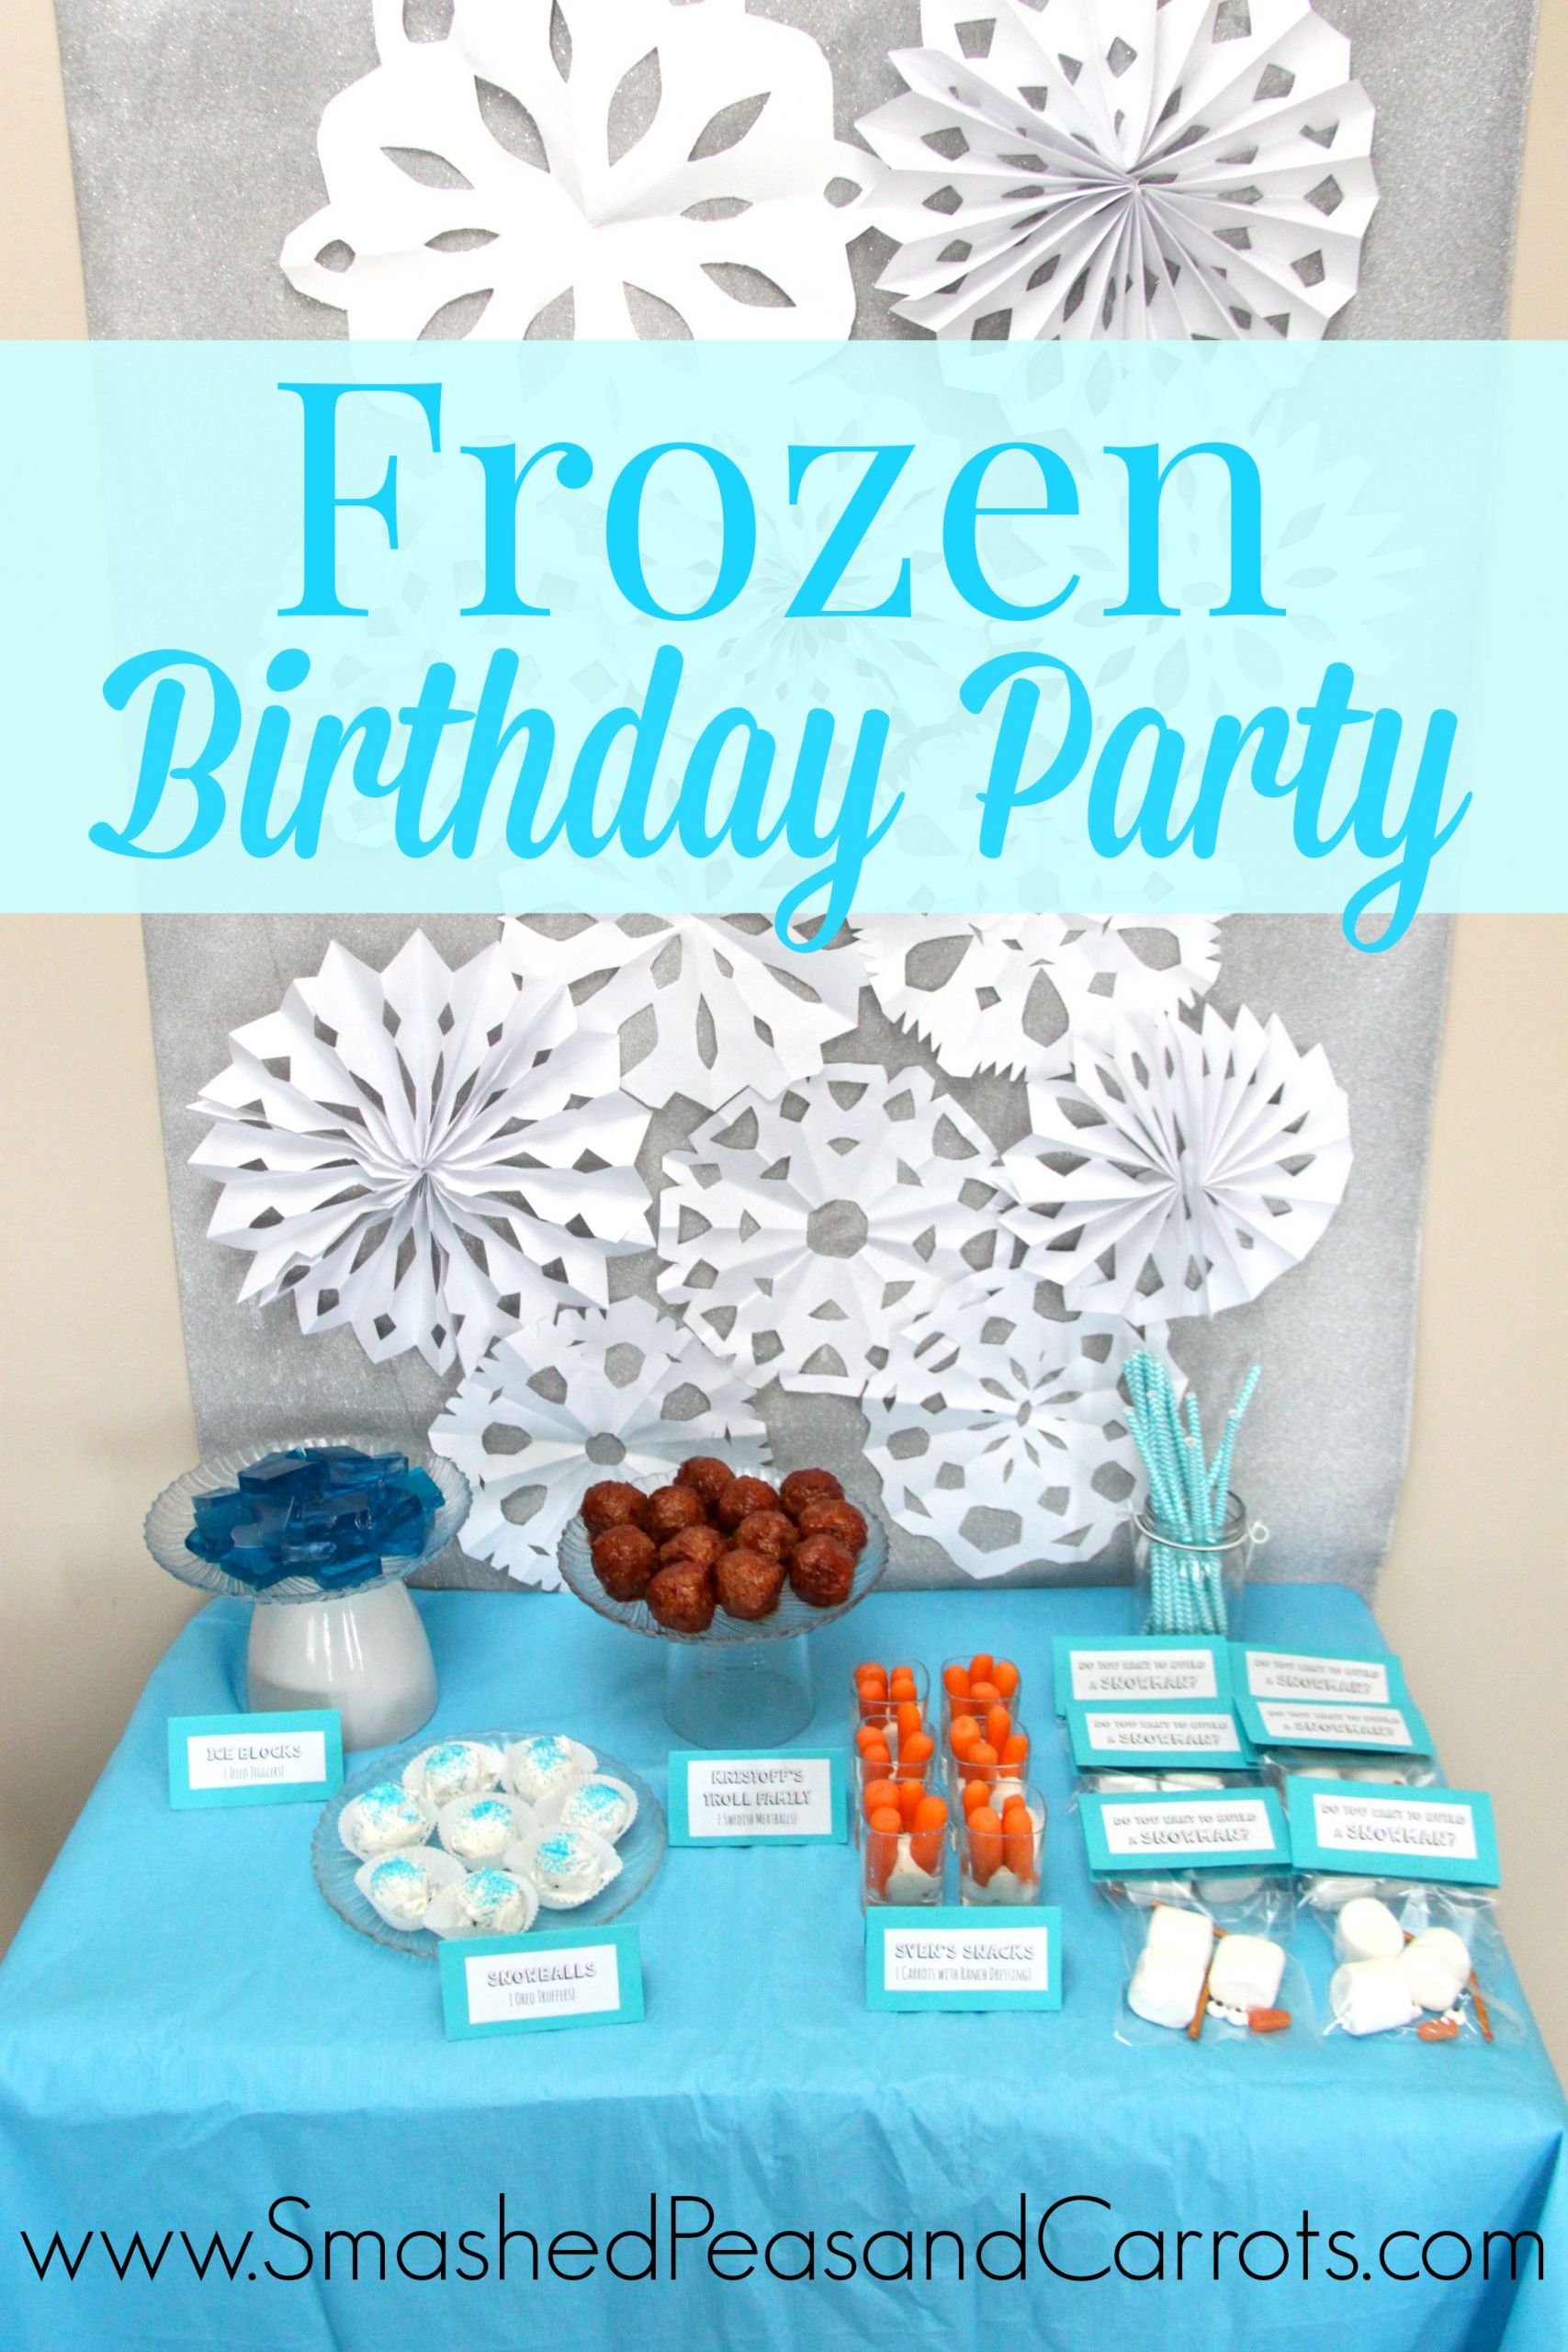 Free Birthday Party Printables Decorations
 Eloise s Frozen Birthday Party with FREE Printables